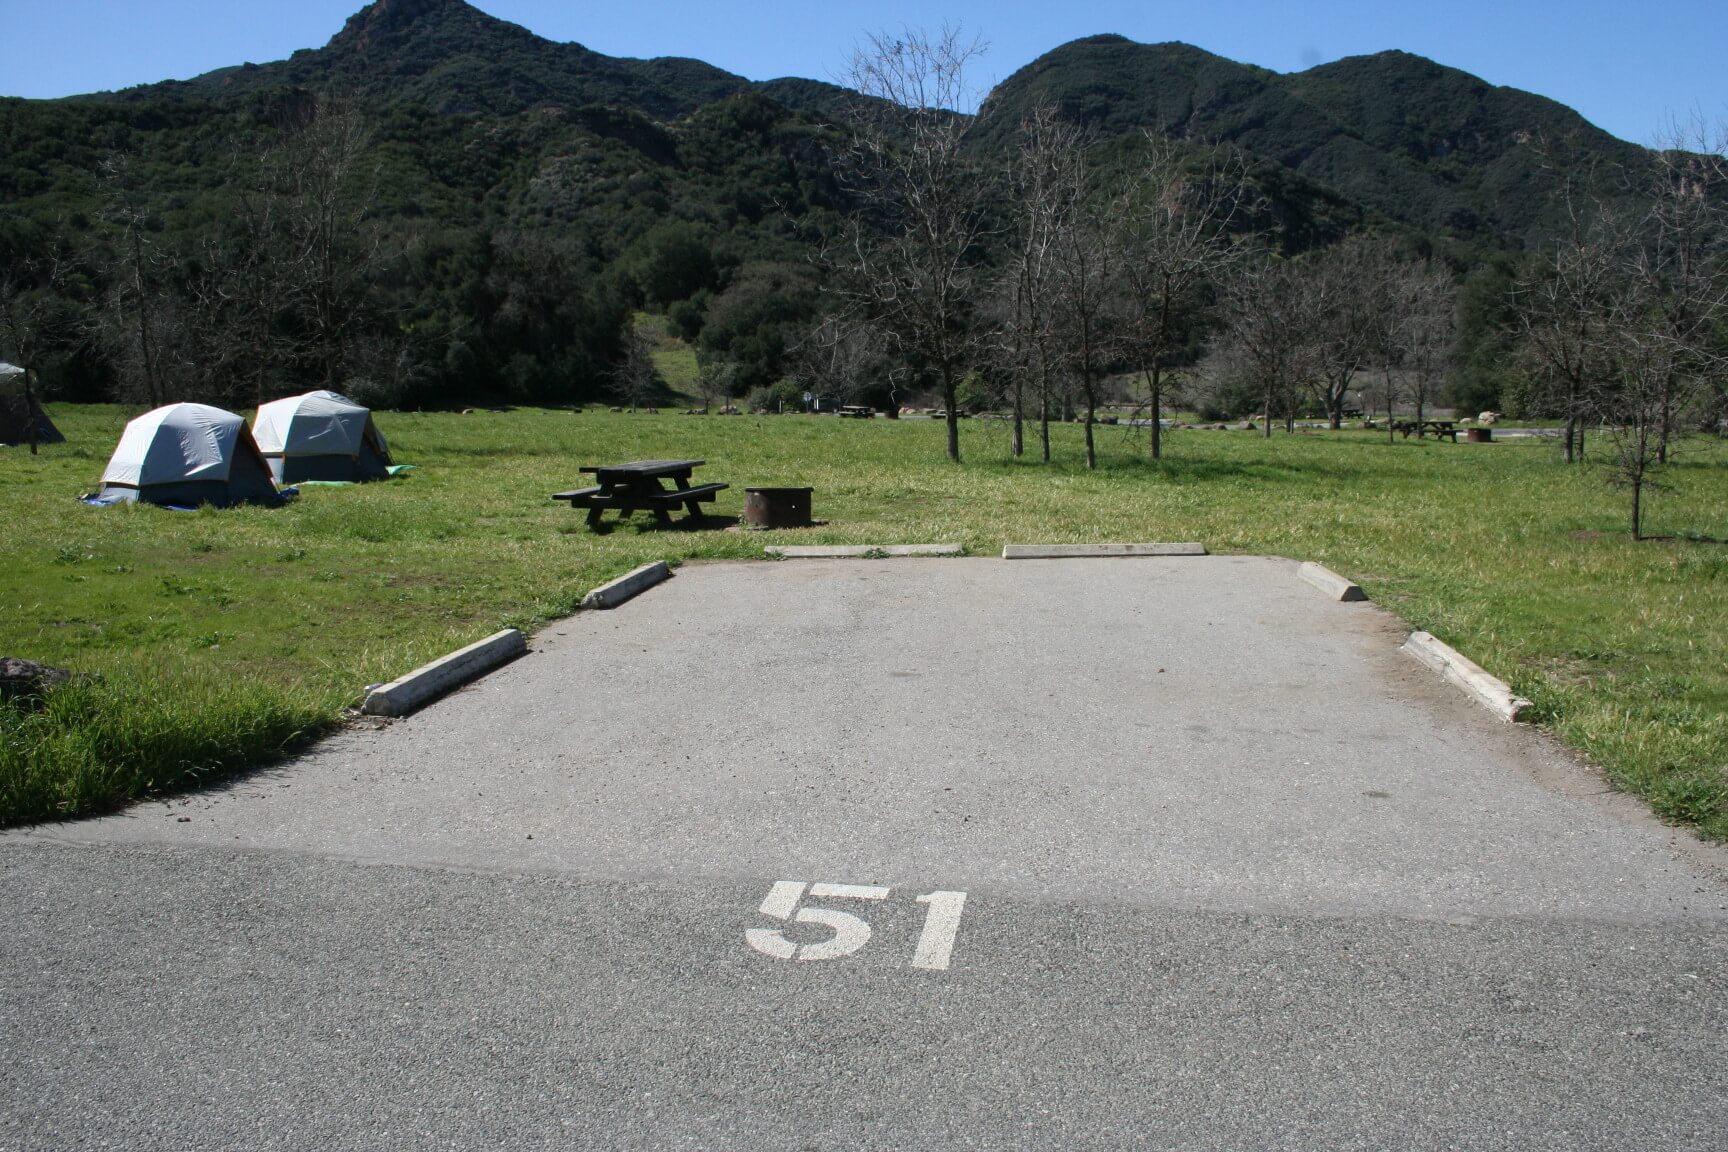 Leo Carrillo & Malibu Creek Campgrounds Are Now Open For Camping - Malibu Creek Site 51 Before Fire